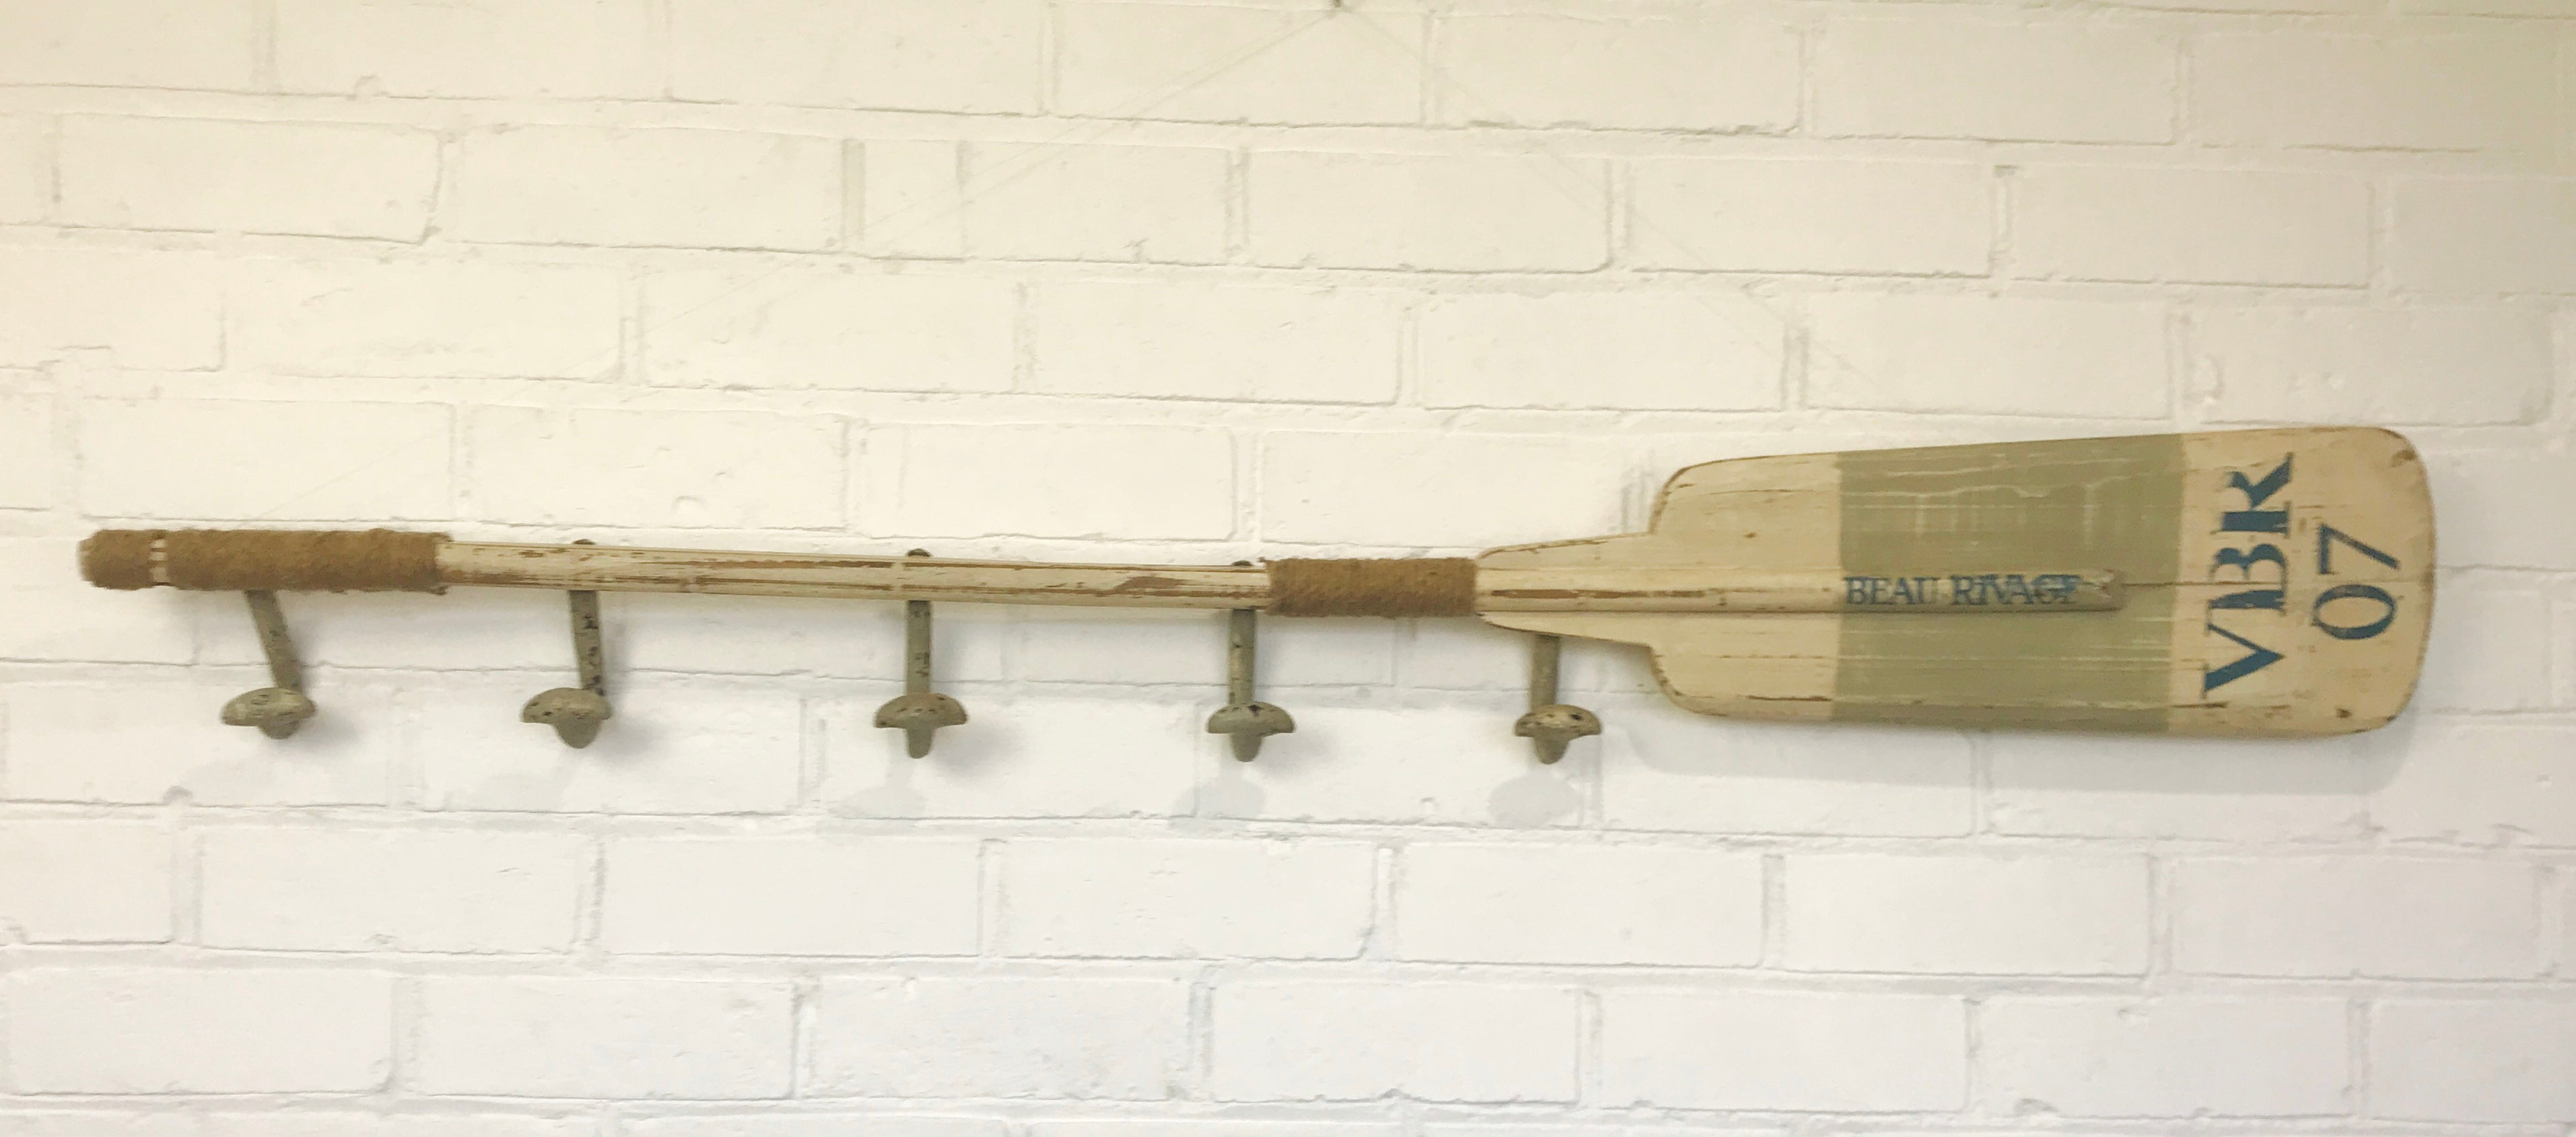 Vintage Wooden Oar / Paddle Wall Hanging Coat Hook | eXibit collection